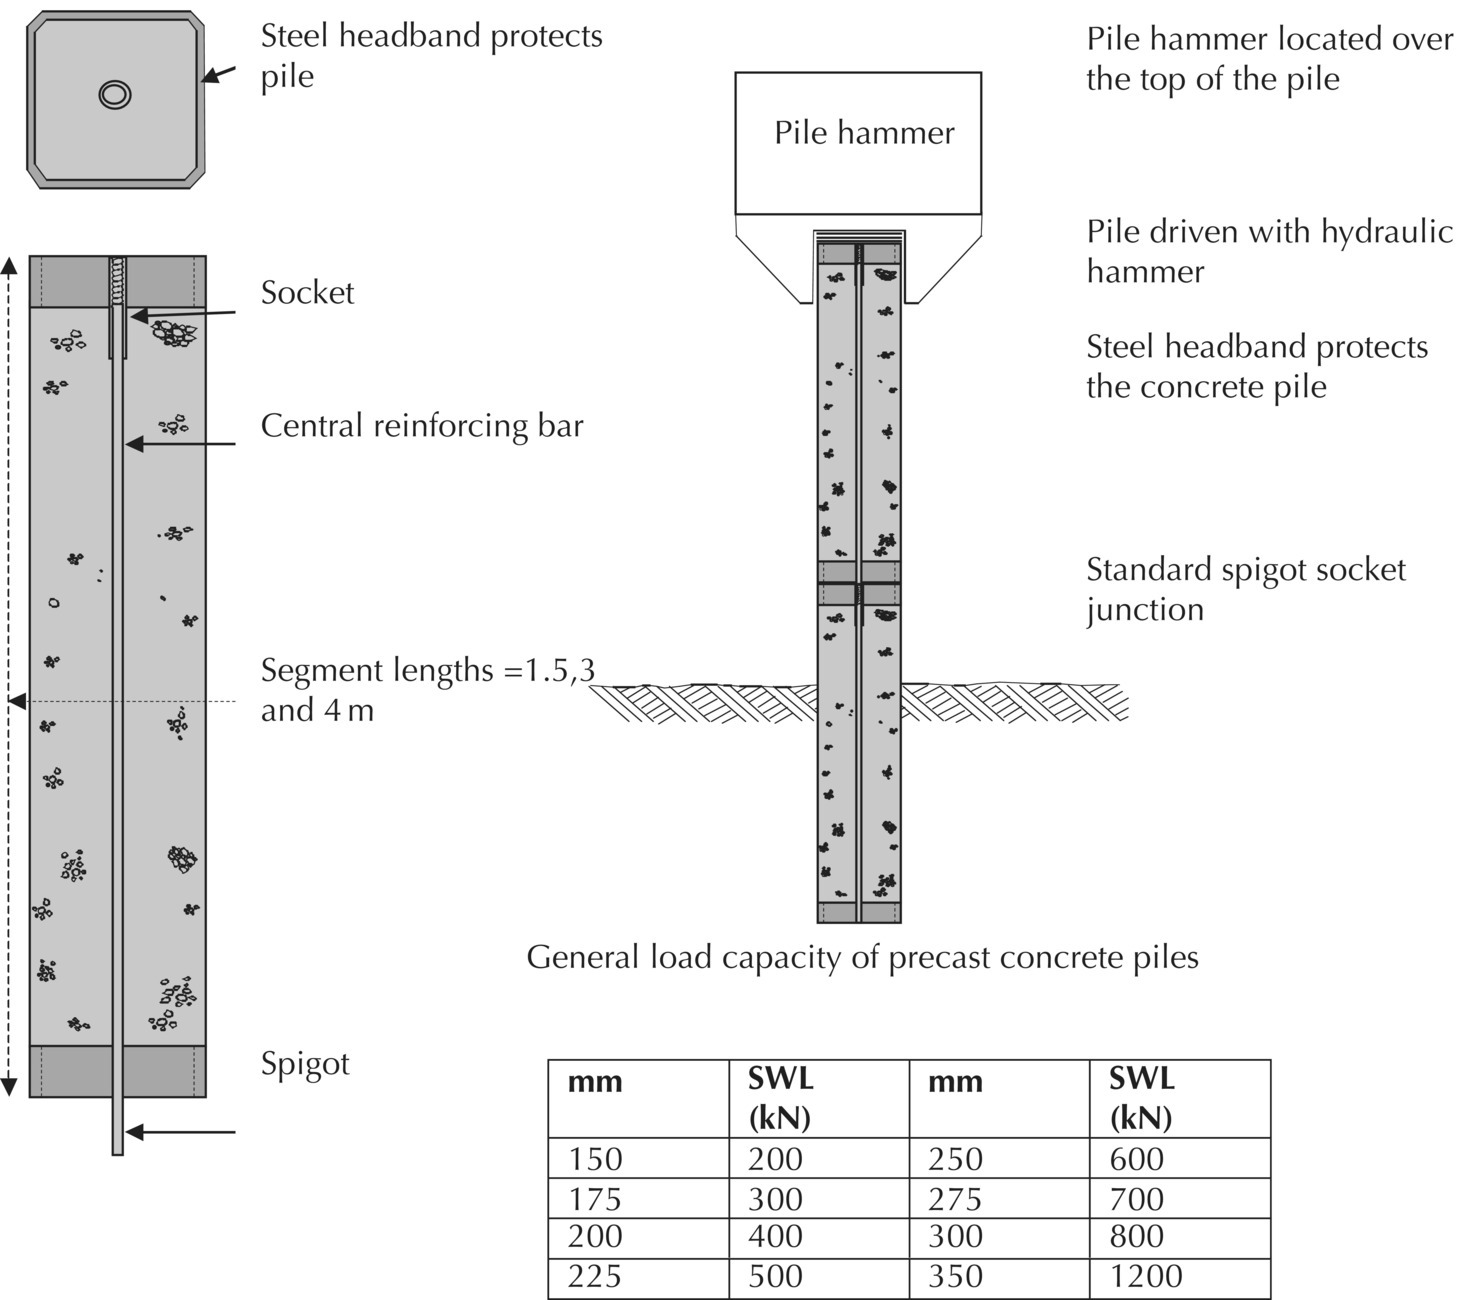 Precast concrete pile segment with arrows marking steel headband protects pile (top left), socket, central reinforcing bar, segment lengths = 1.5, 3, and 4m, and spigot (bottom left) with pile hammer, etc. (right).